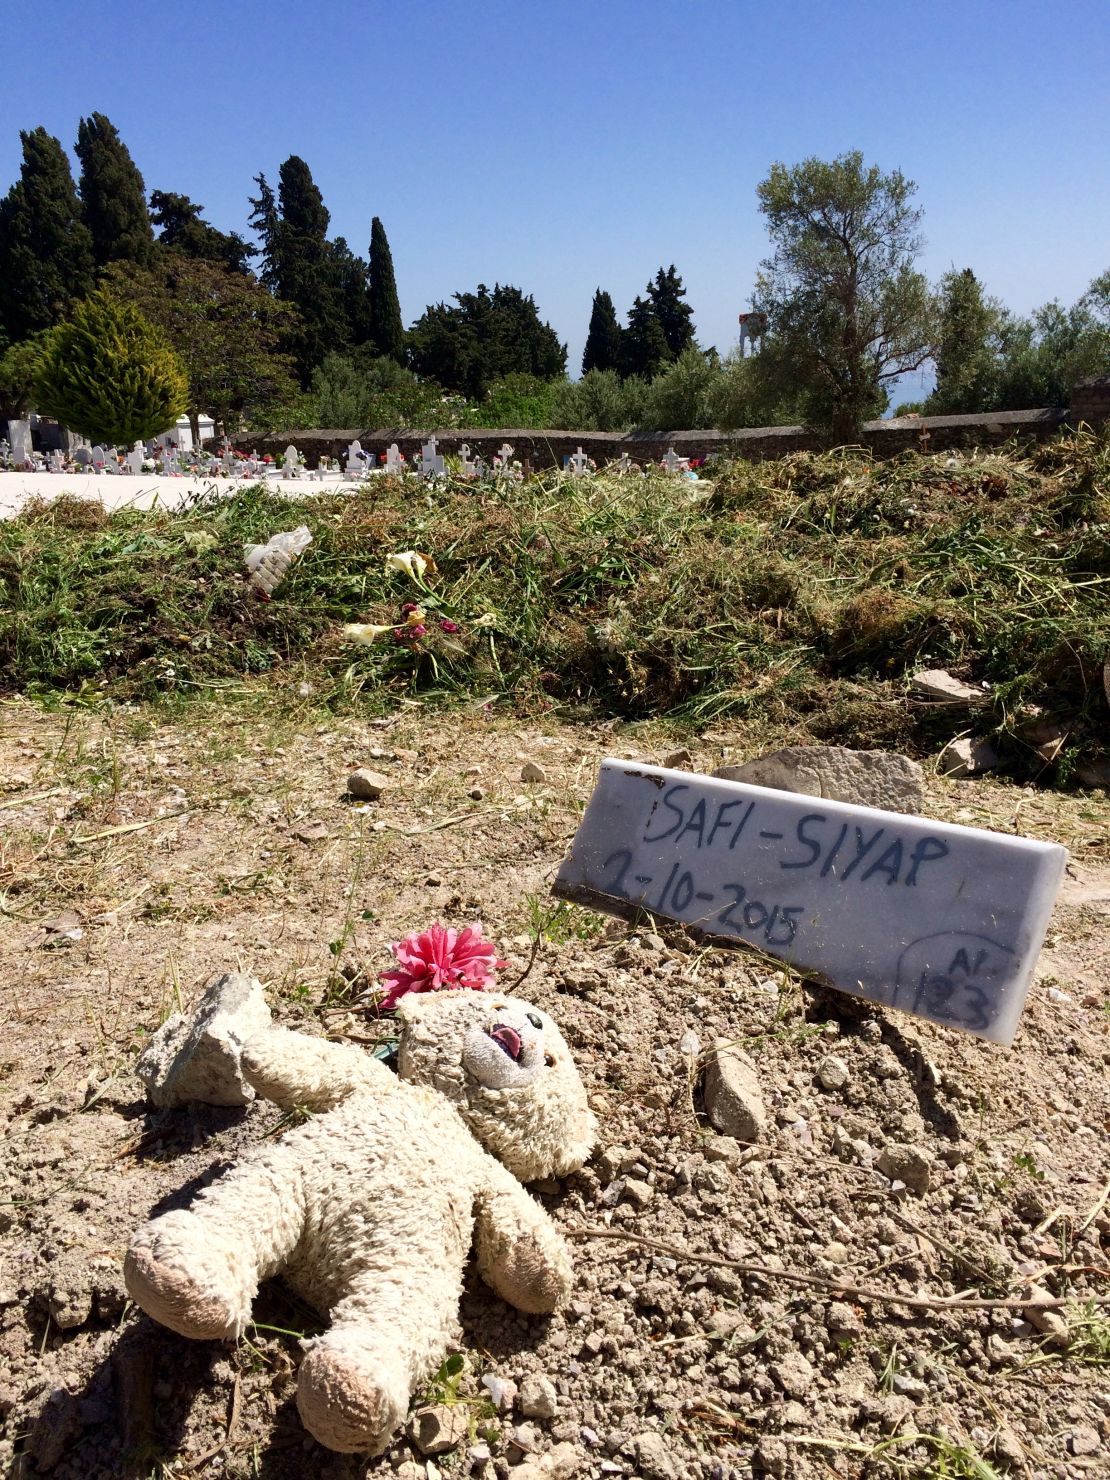 The grave of 1-year-old Safi Siyap, who drowned while the coast guard attempted to rescue her family.